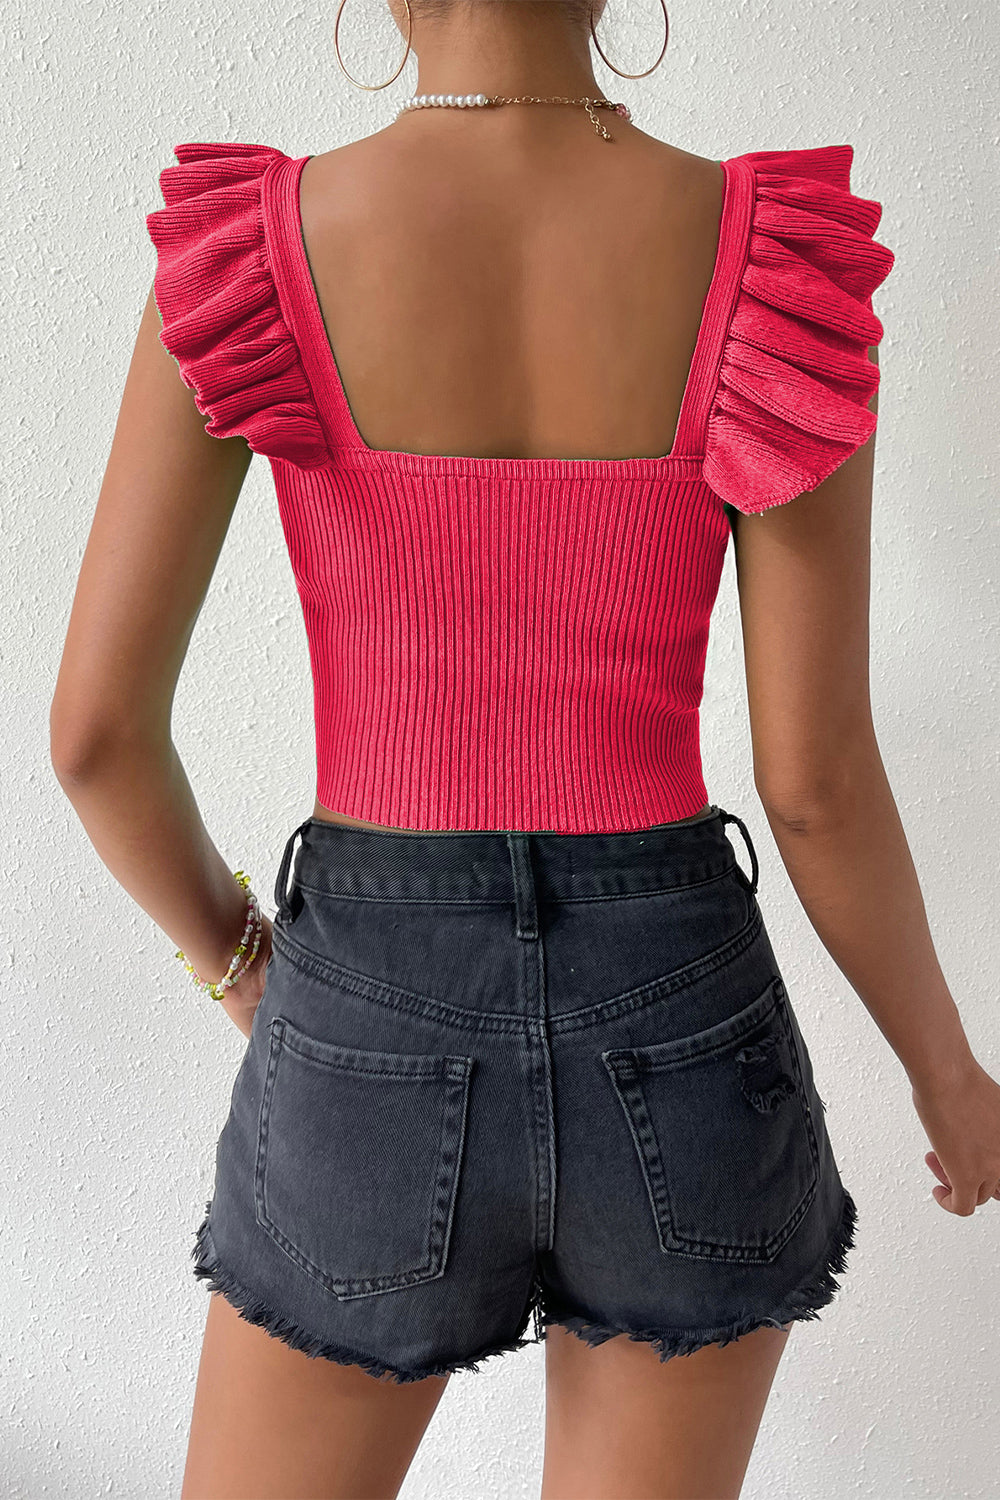 Square Neck Tie Front Knit Top - Tops & Tees - Shirts & Tops - 15 - 2024